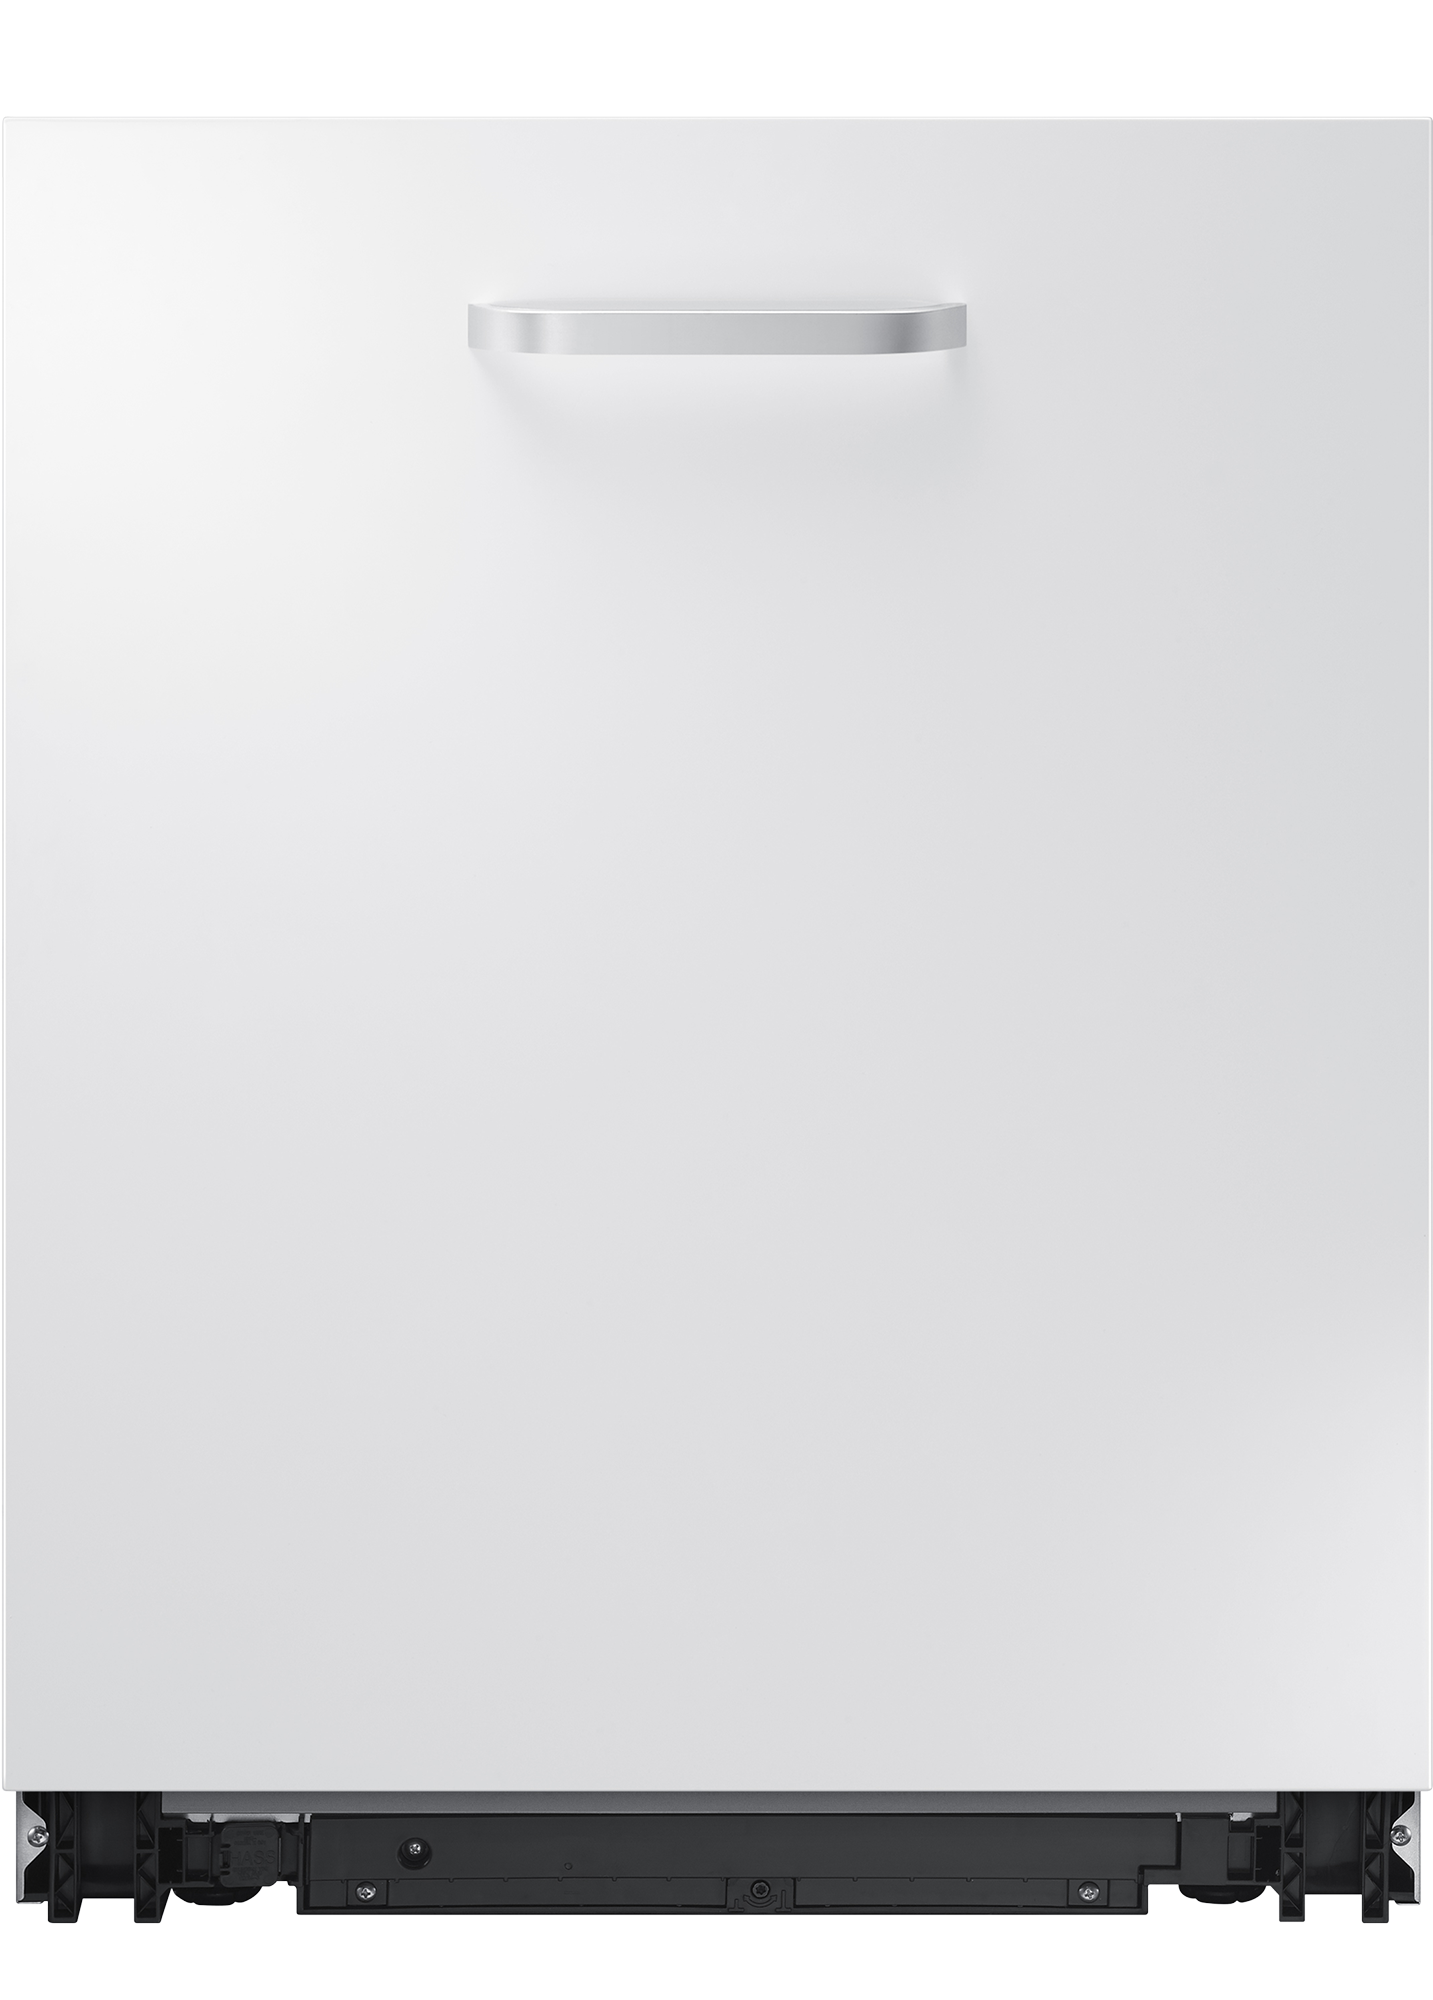 SAMSUNG Fully Integrated Full Size Dishwasher With Waterwall™ Technology And Zonebooster™